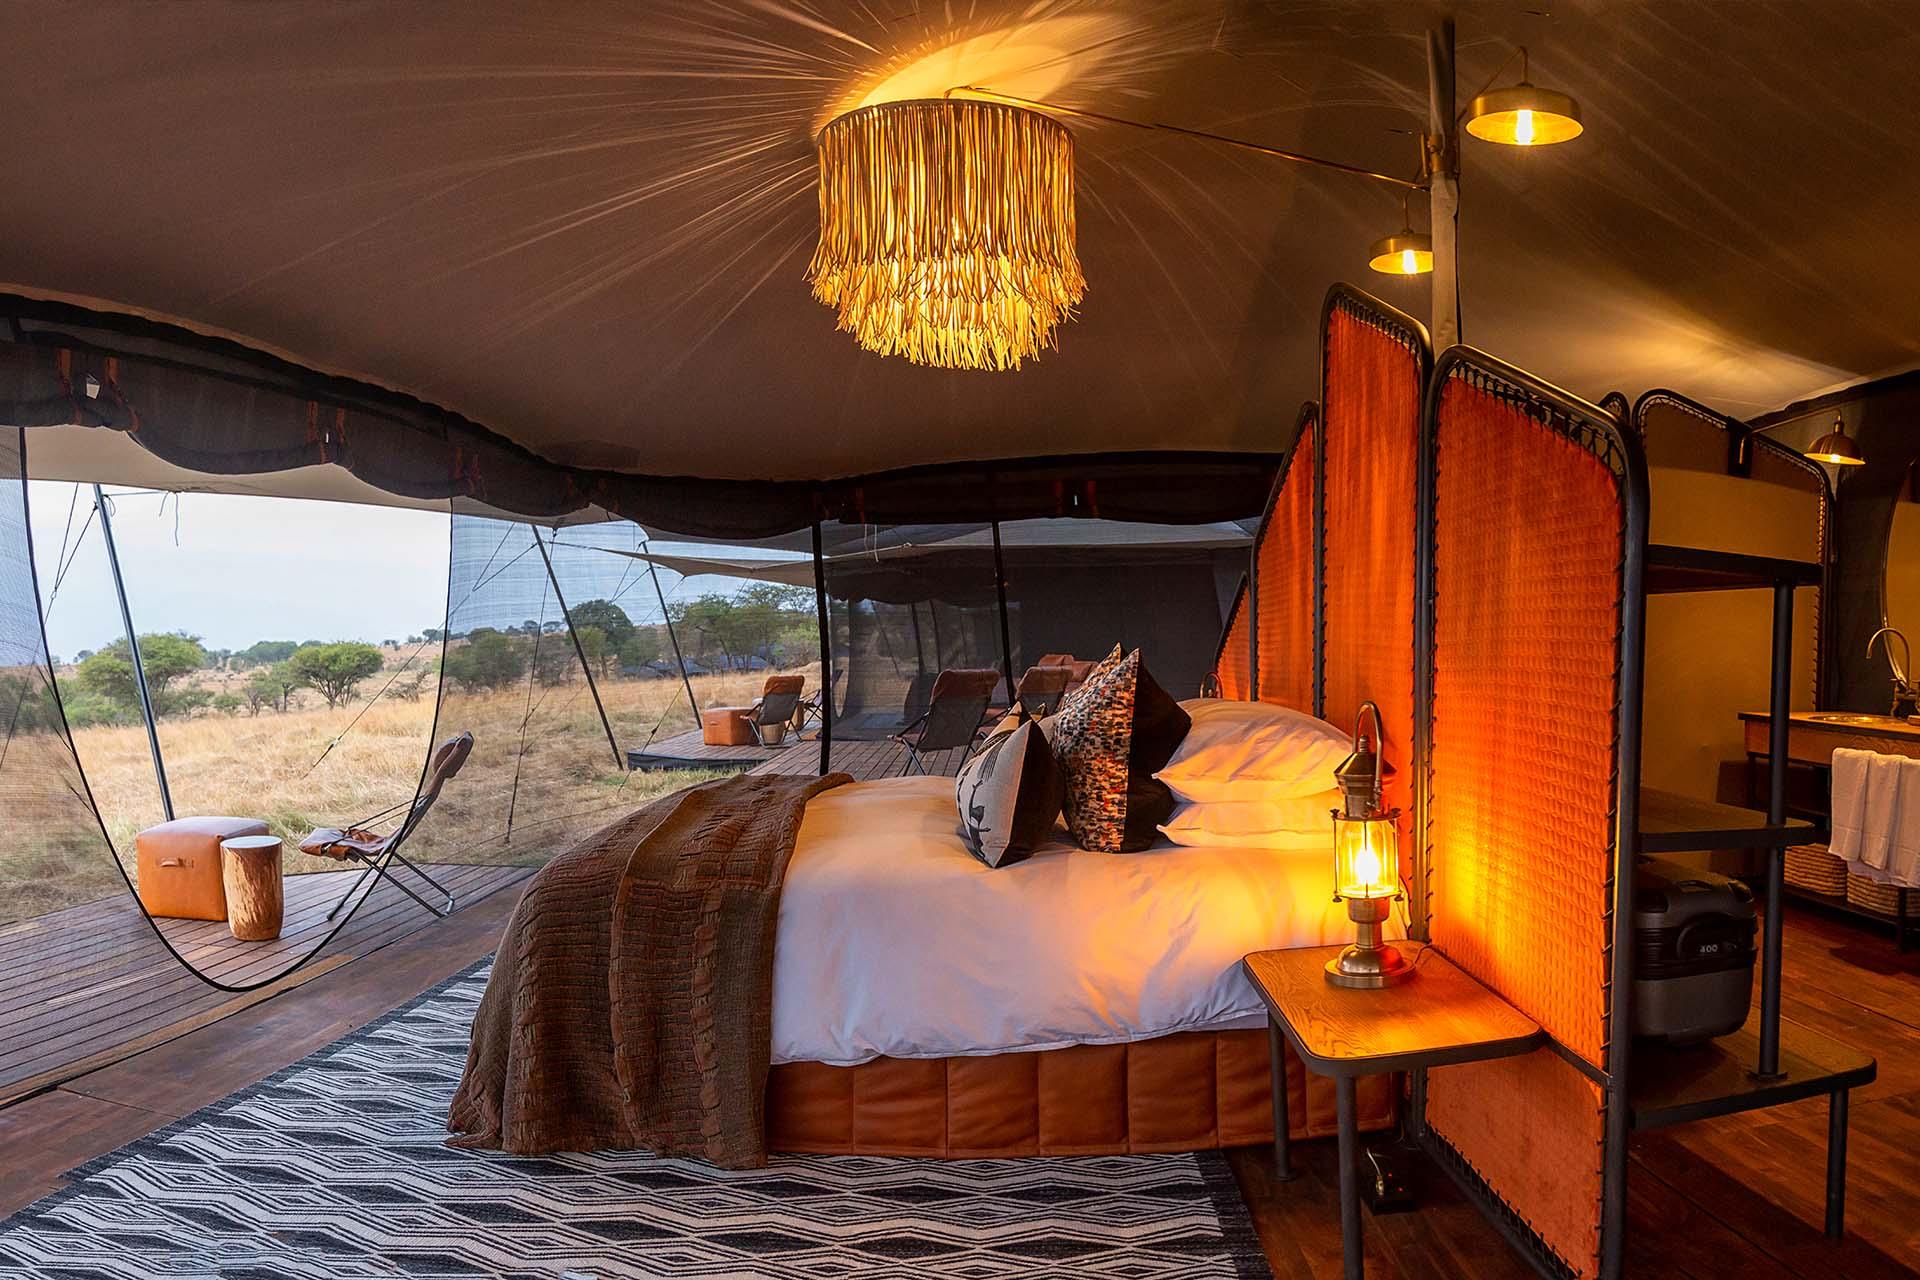 Siringit Migration Camp is one of the first mobile camps to combine 5-star luxury with the mobile camping experience